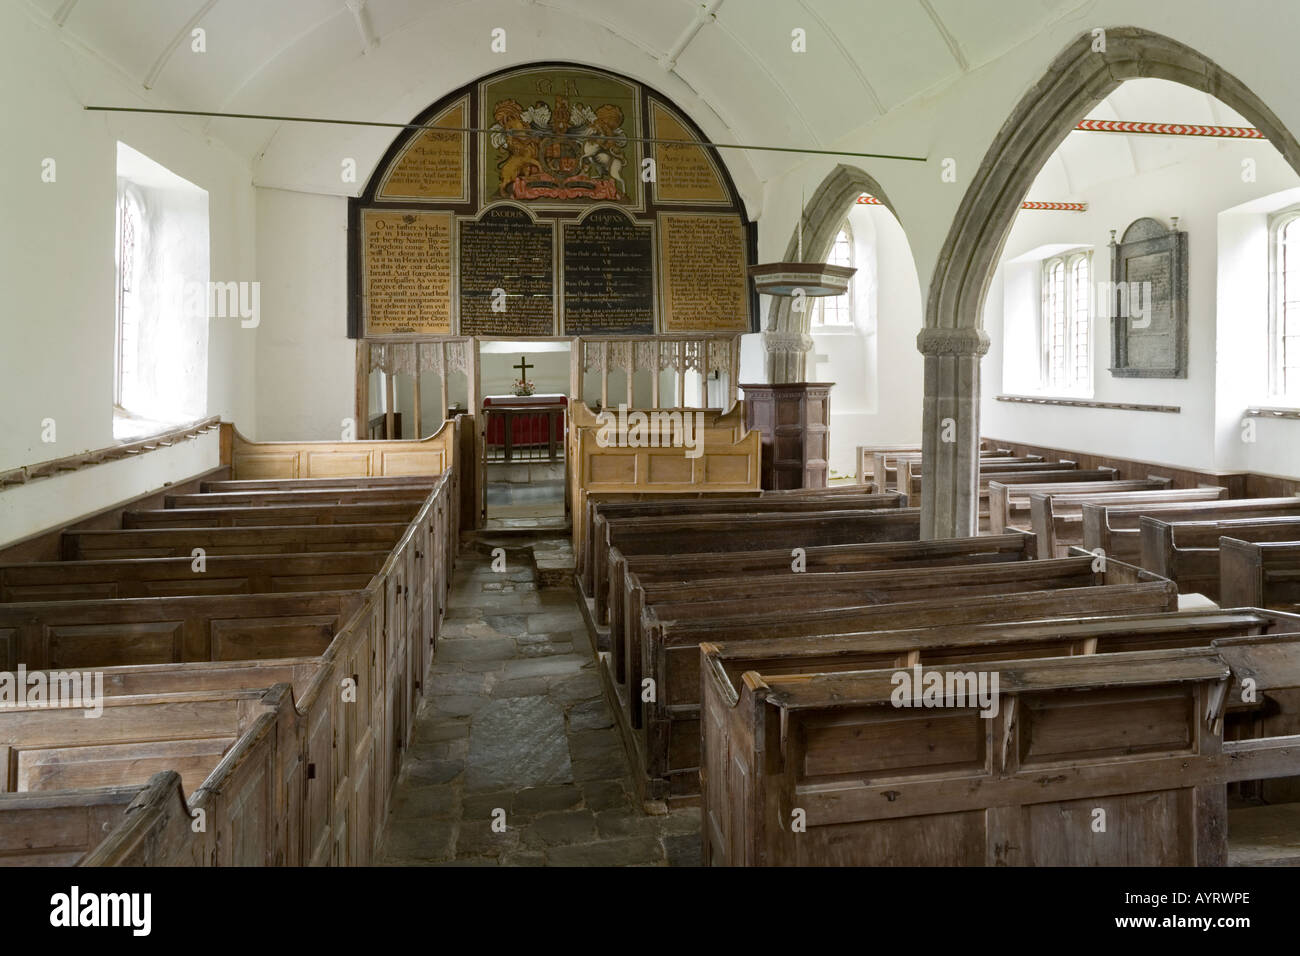 The 18th century pews and interior of the old church of St Petrock (Petroc) at Parracombe, Exmoor, Devon UK Stock Photo